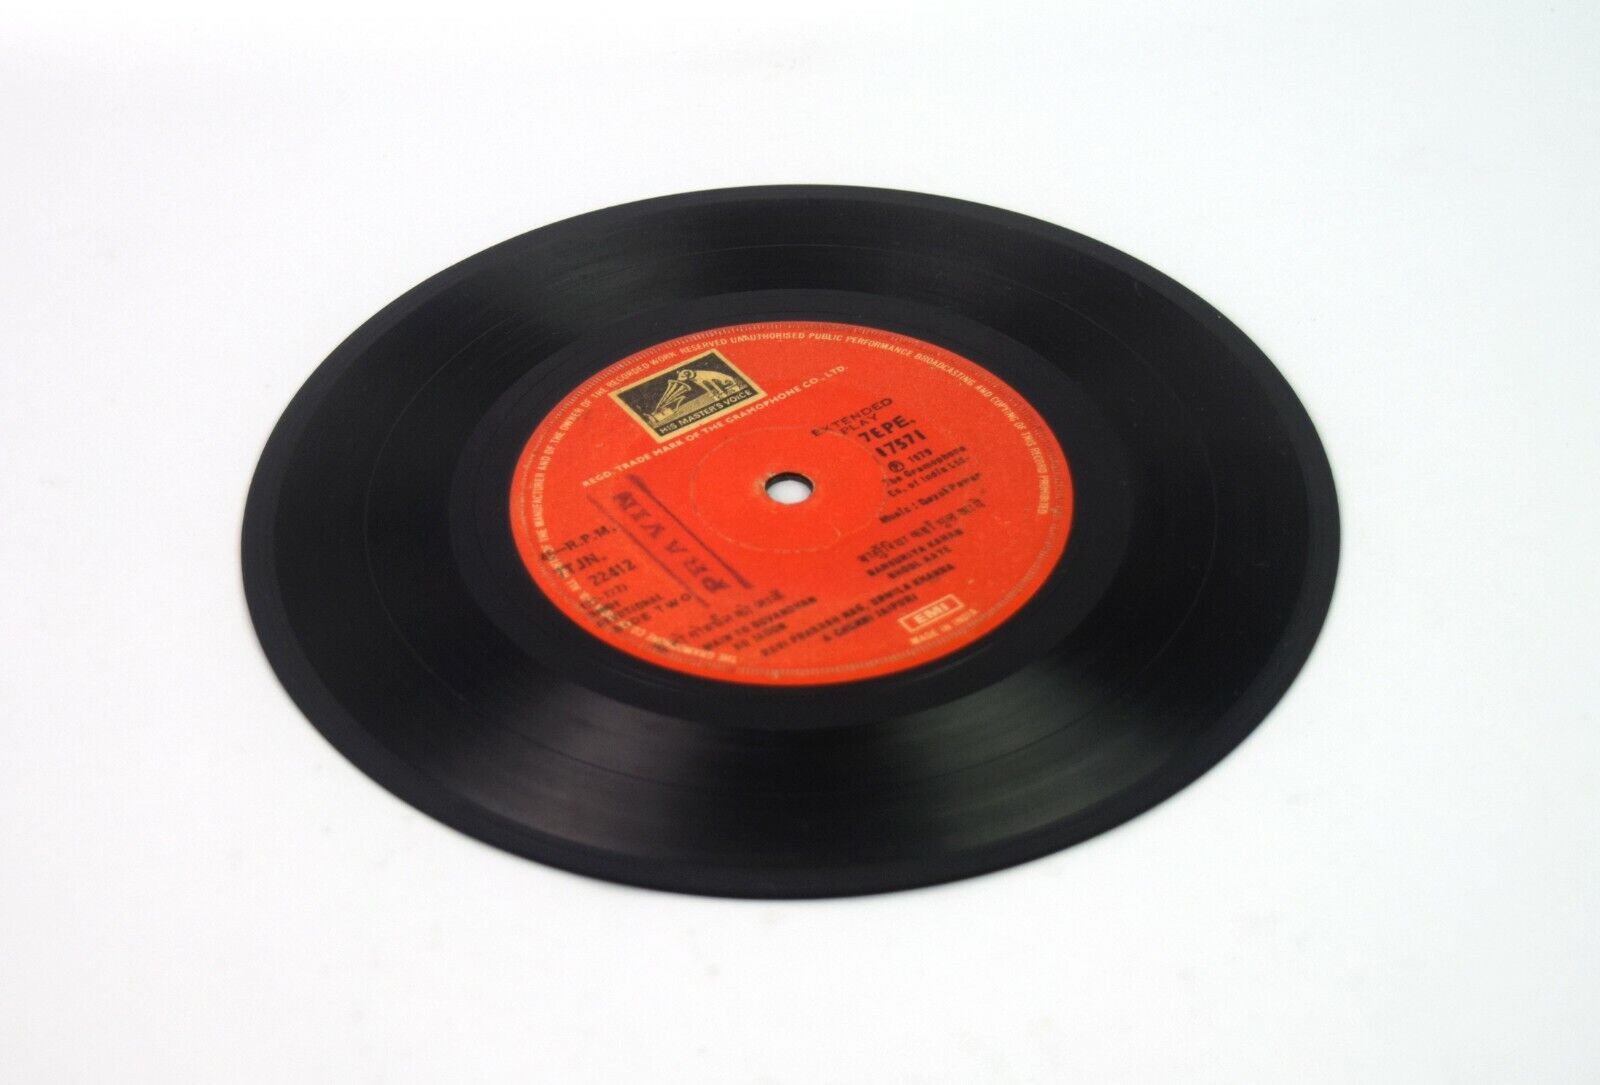 Indian Vintage Bollywood Song Gramophone Music Record Collectible i46-156 US